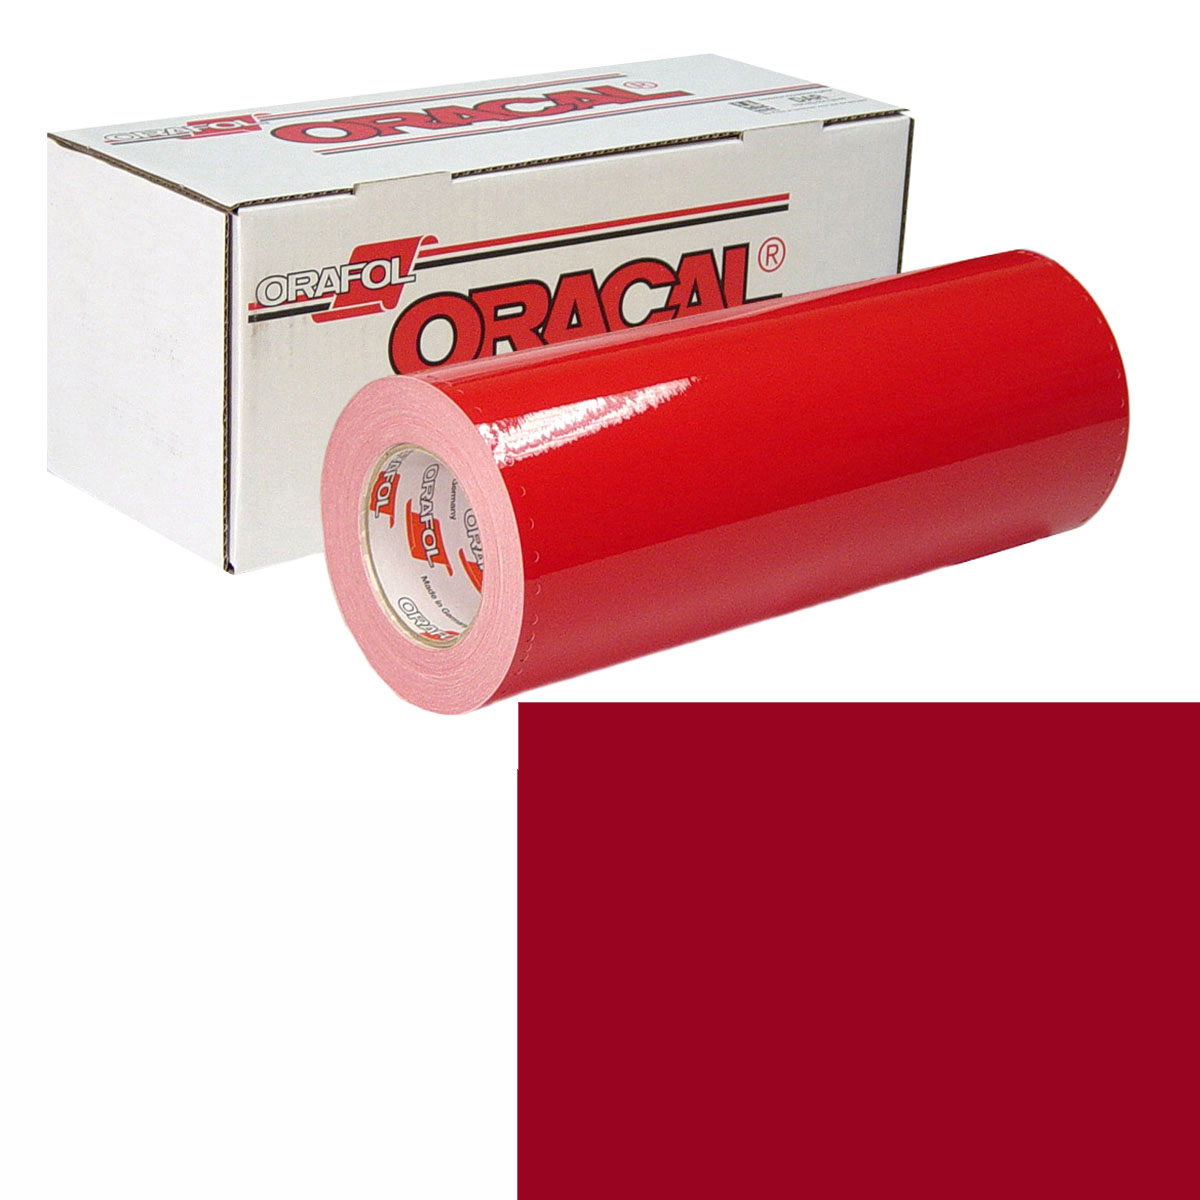 ORACAL 951 30in X 50yd 348 Scarlet Red